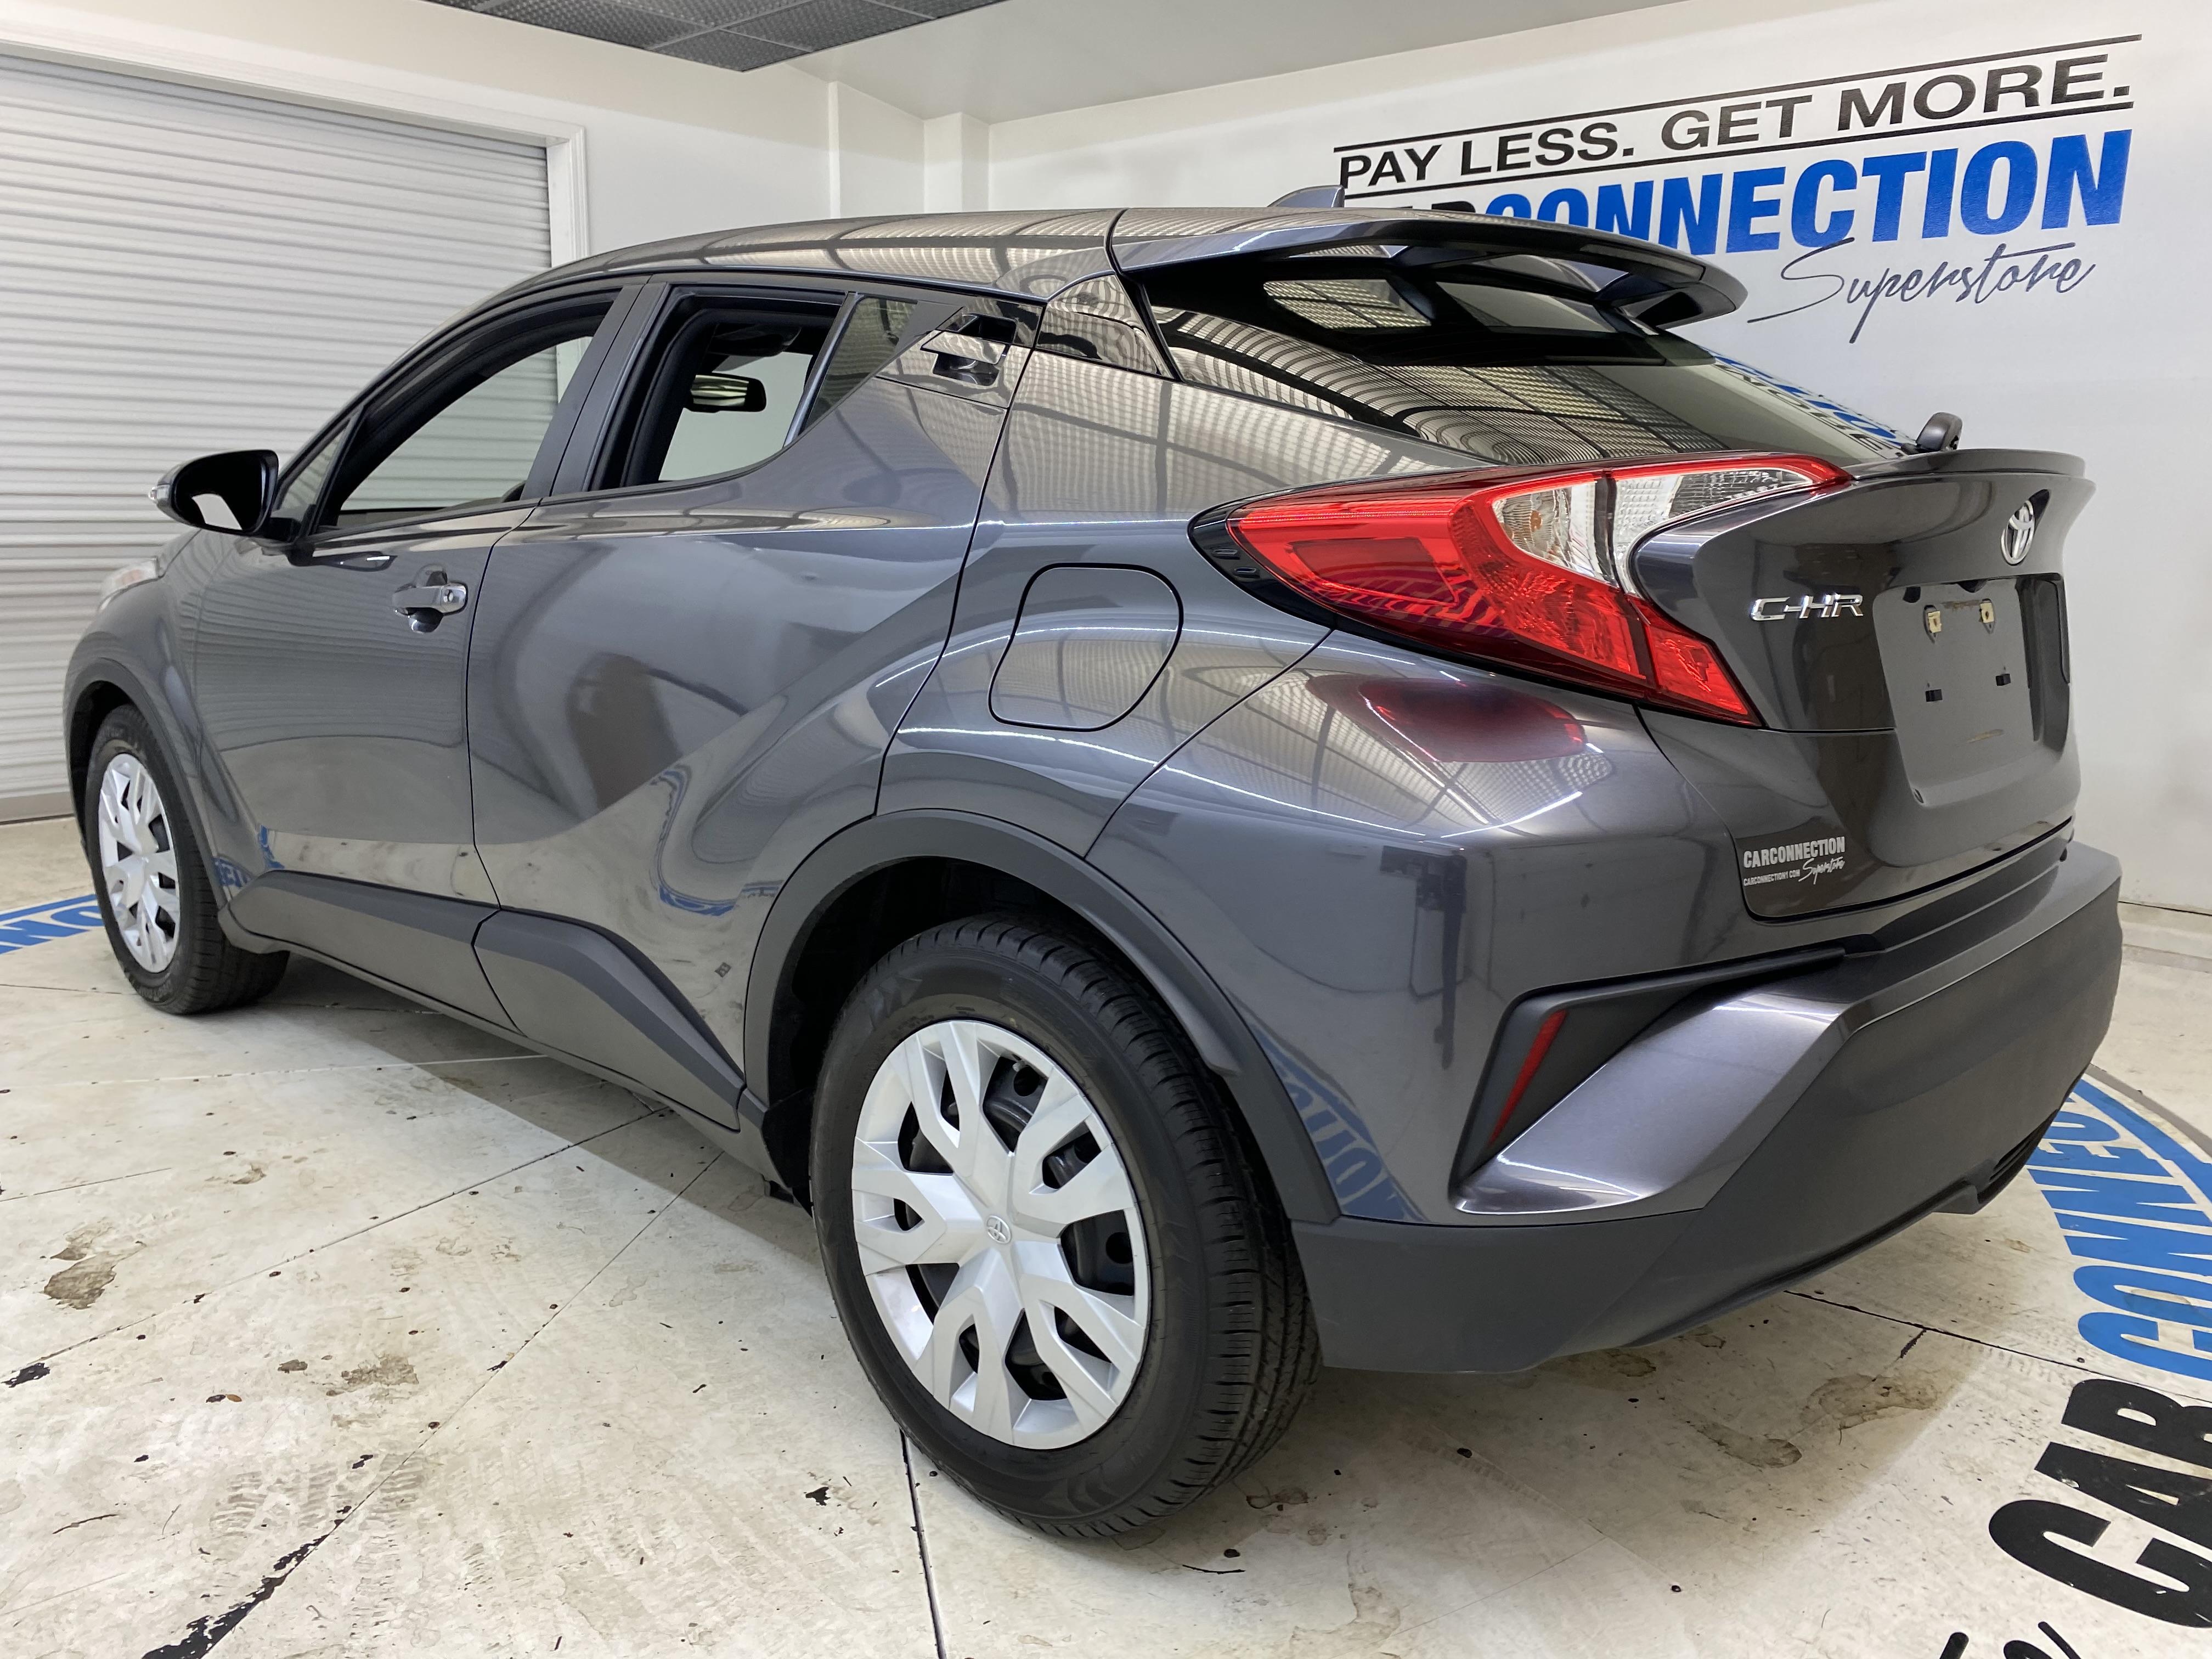 Car Connection Superstore - Used vehicle - SUV TOYOTA C-HR 2019